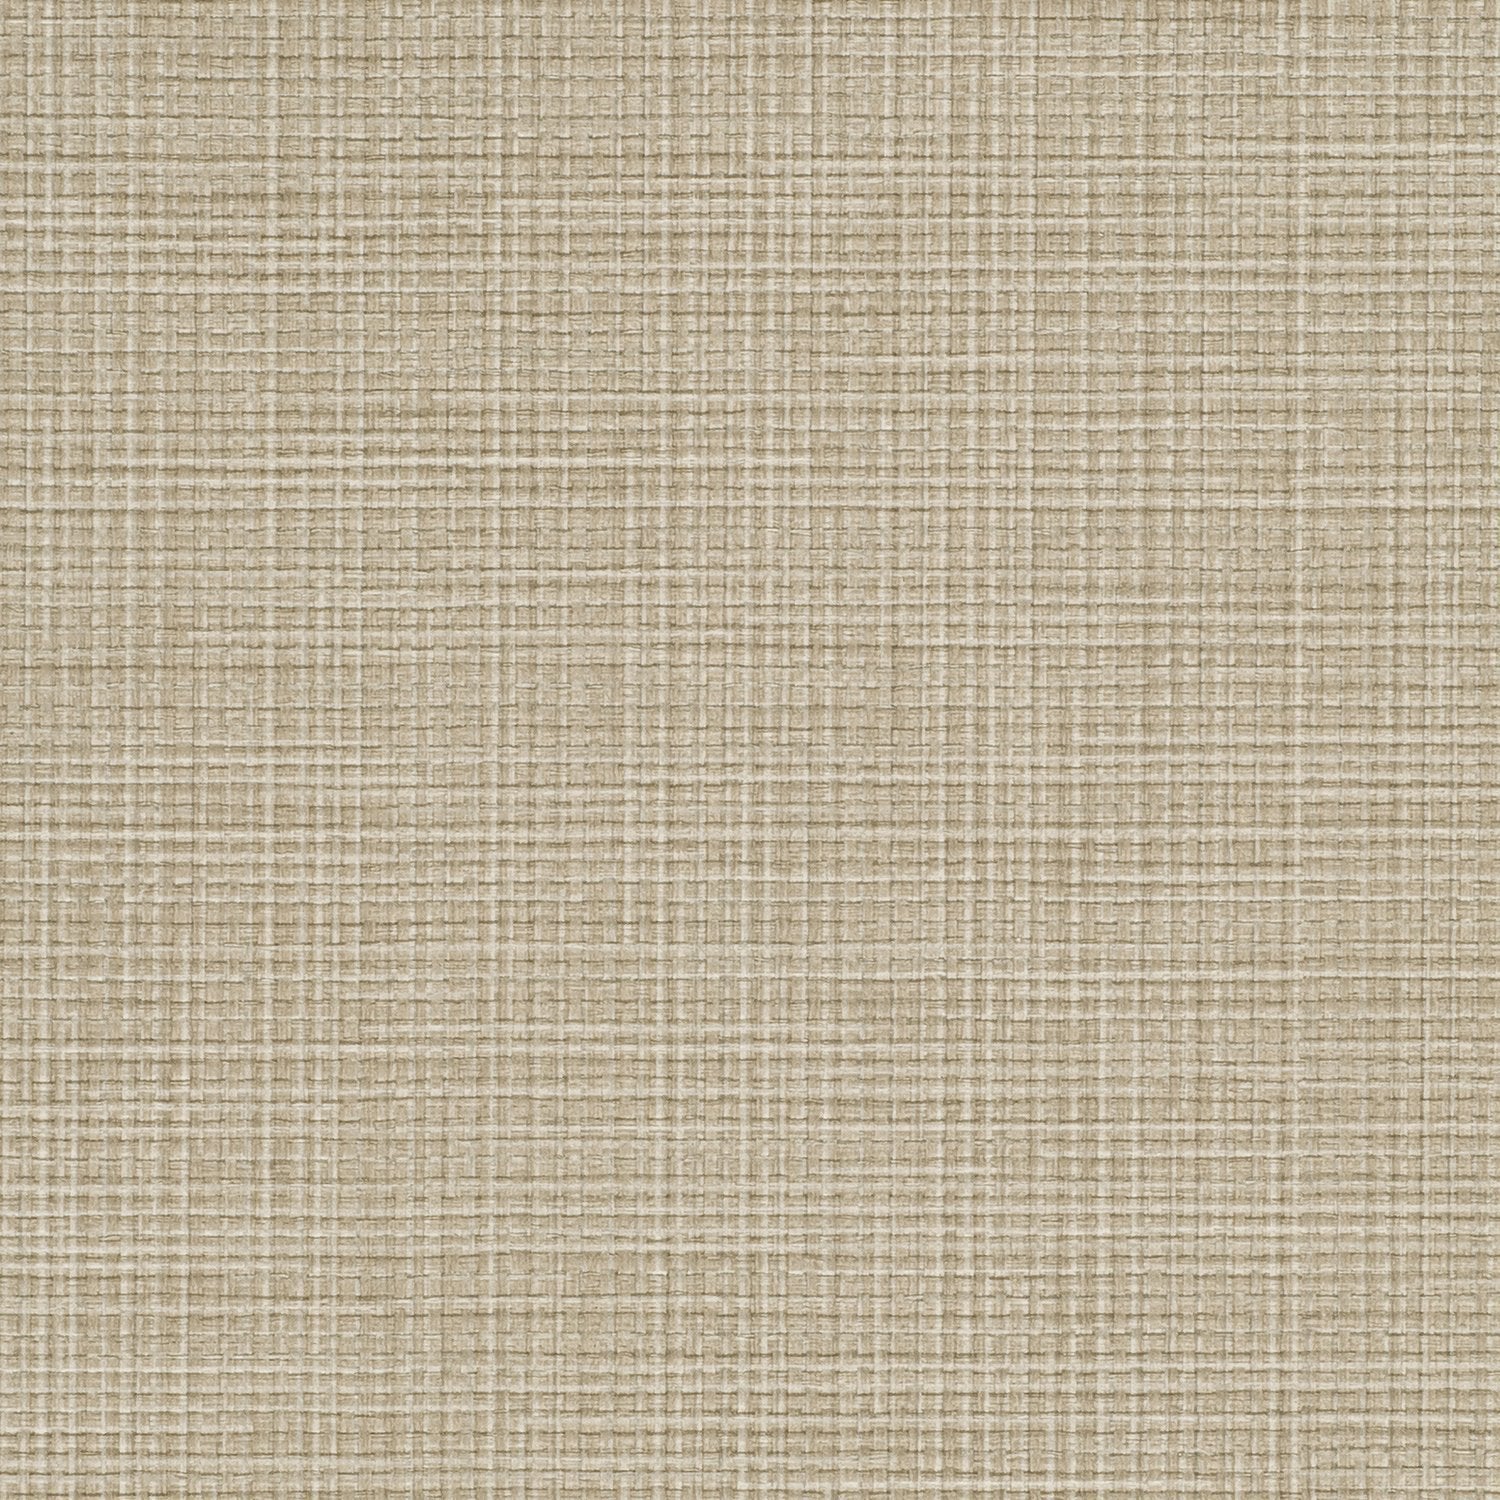 Pave - Y46300 - Wallcovering - Vycon - Kube Contract